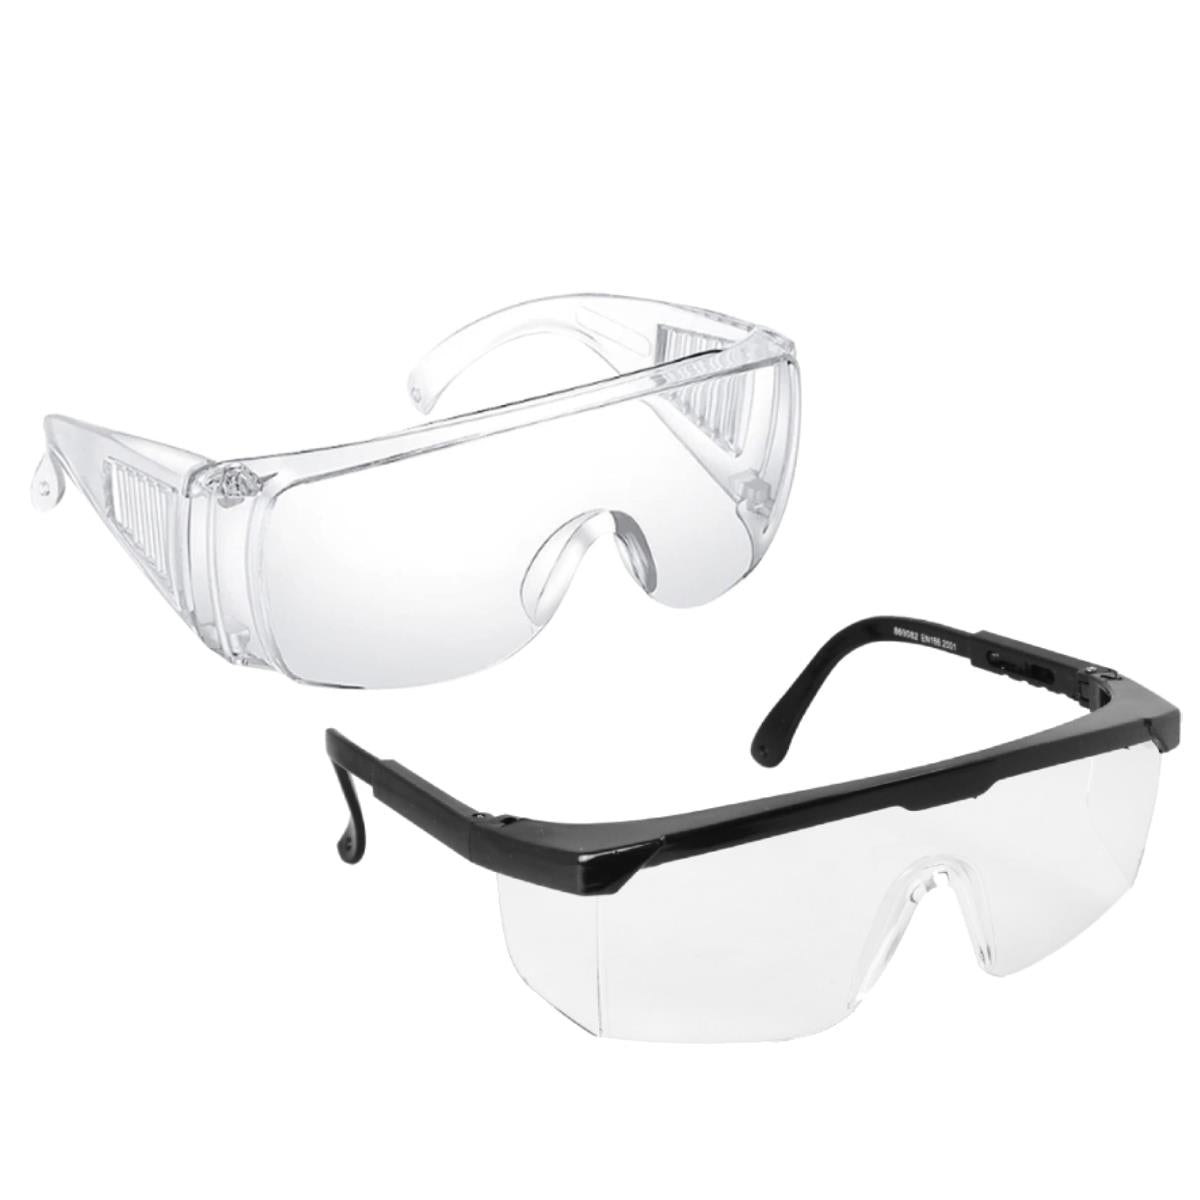 Keep Your Eyes Protected with Eye Safety Glass